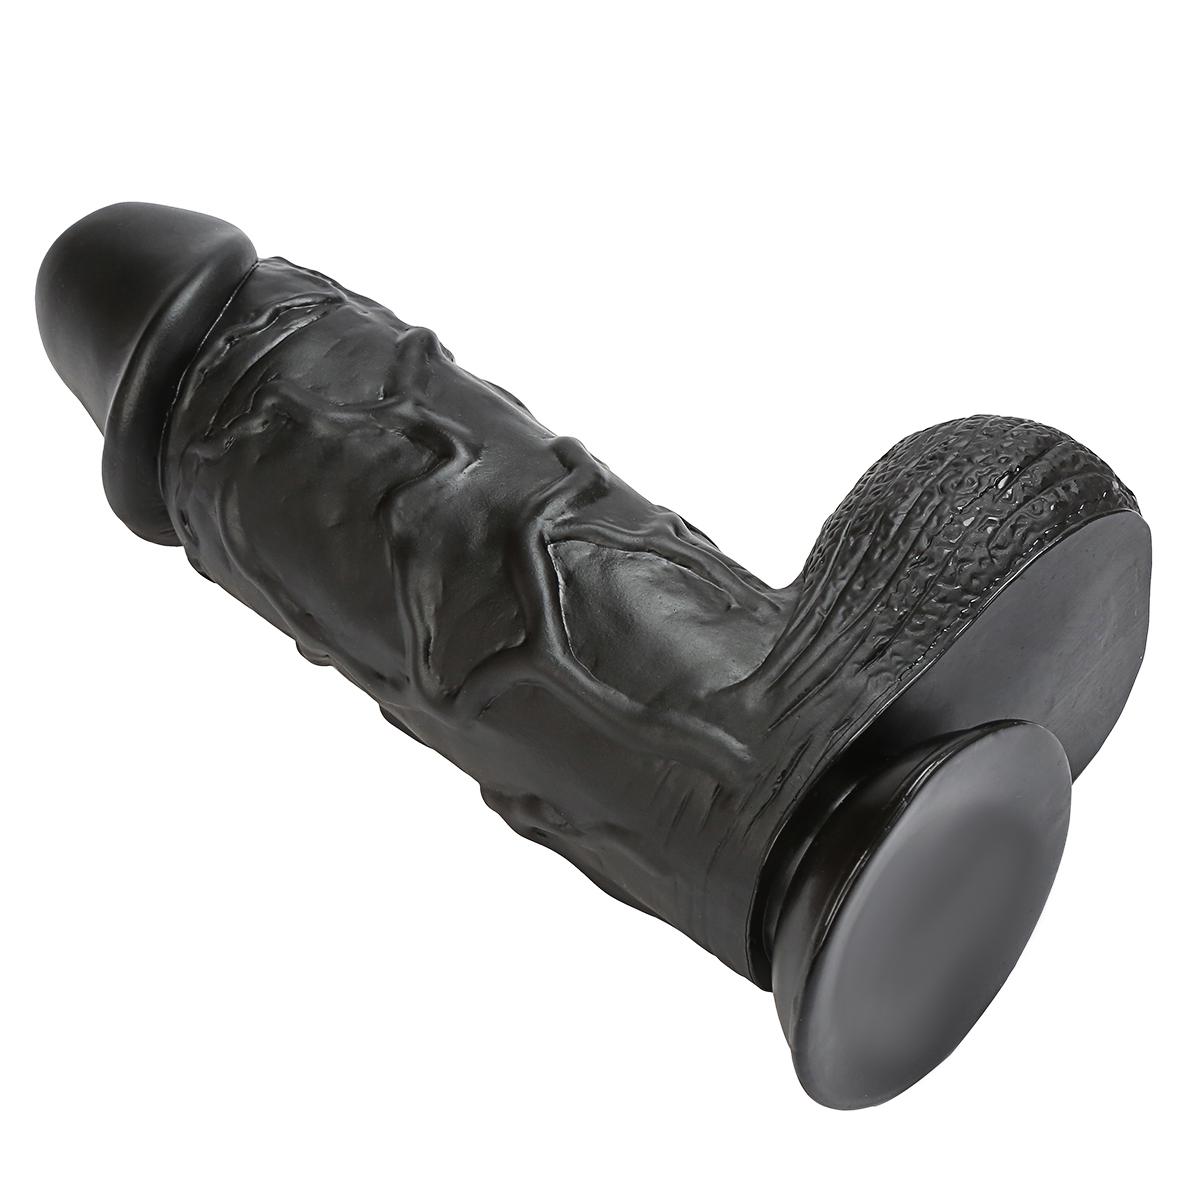 11 inch hot selling imitation and fake penis, sturdy stallion, adult sex toy Huge Dildo wl274